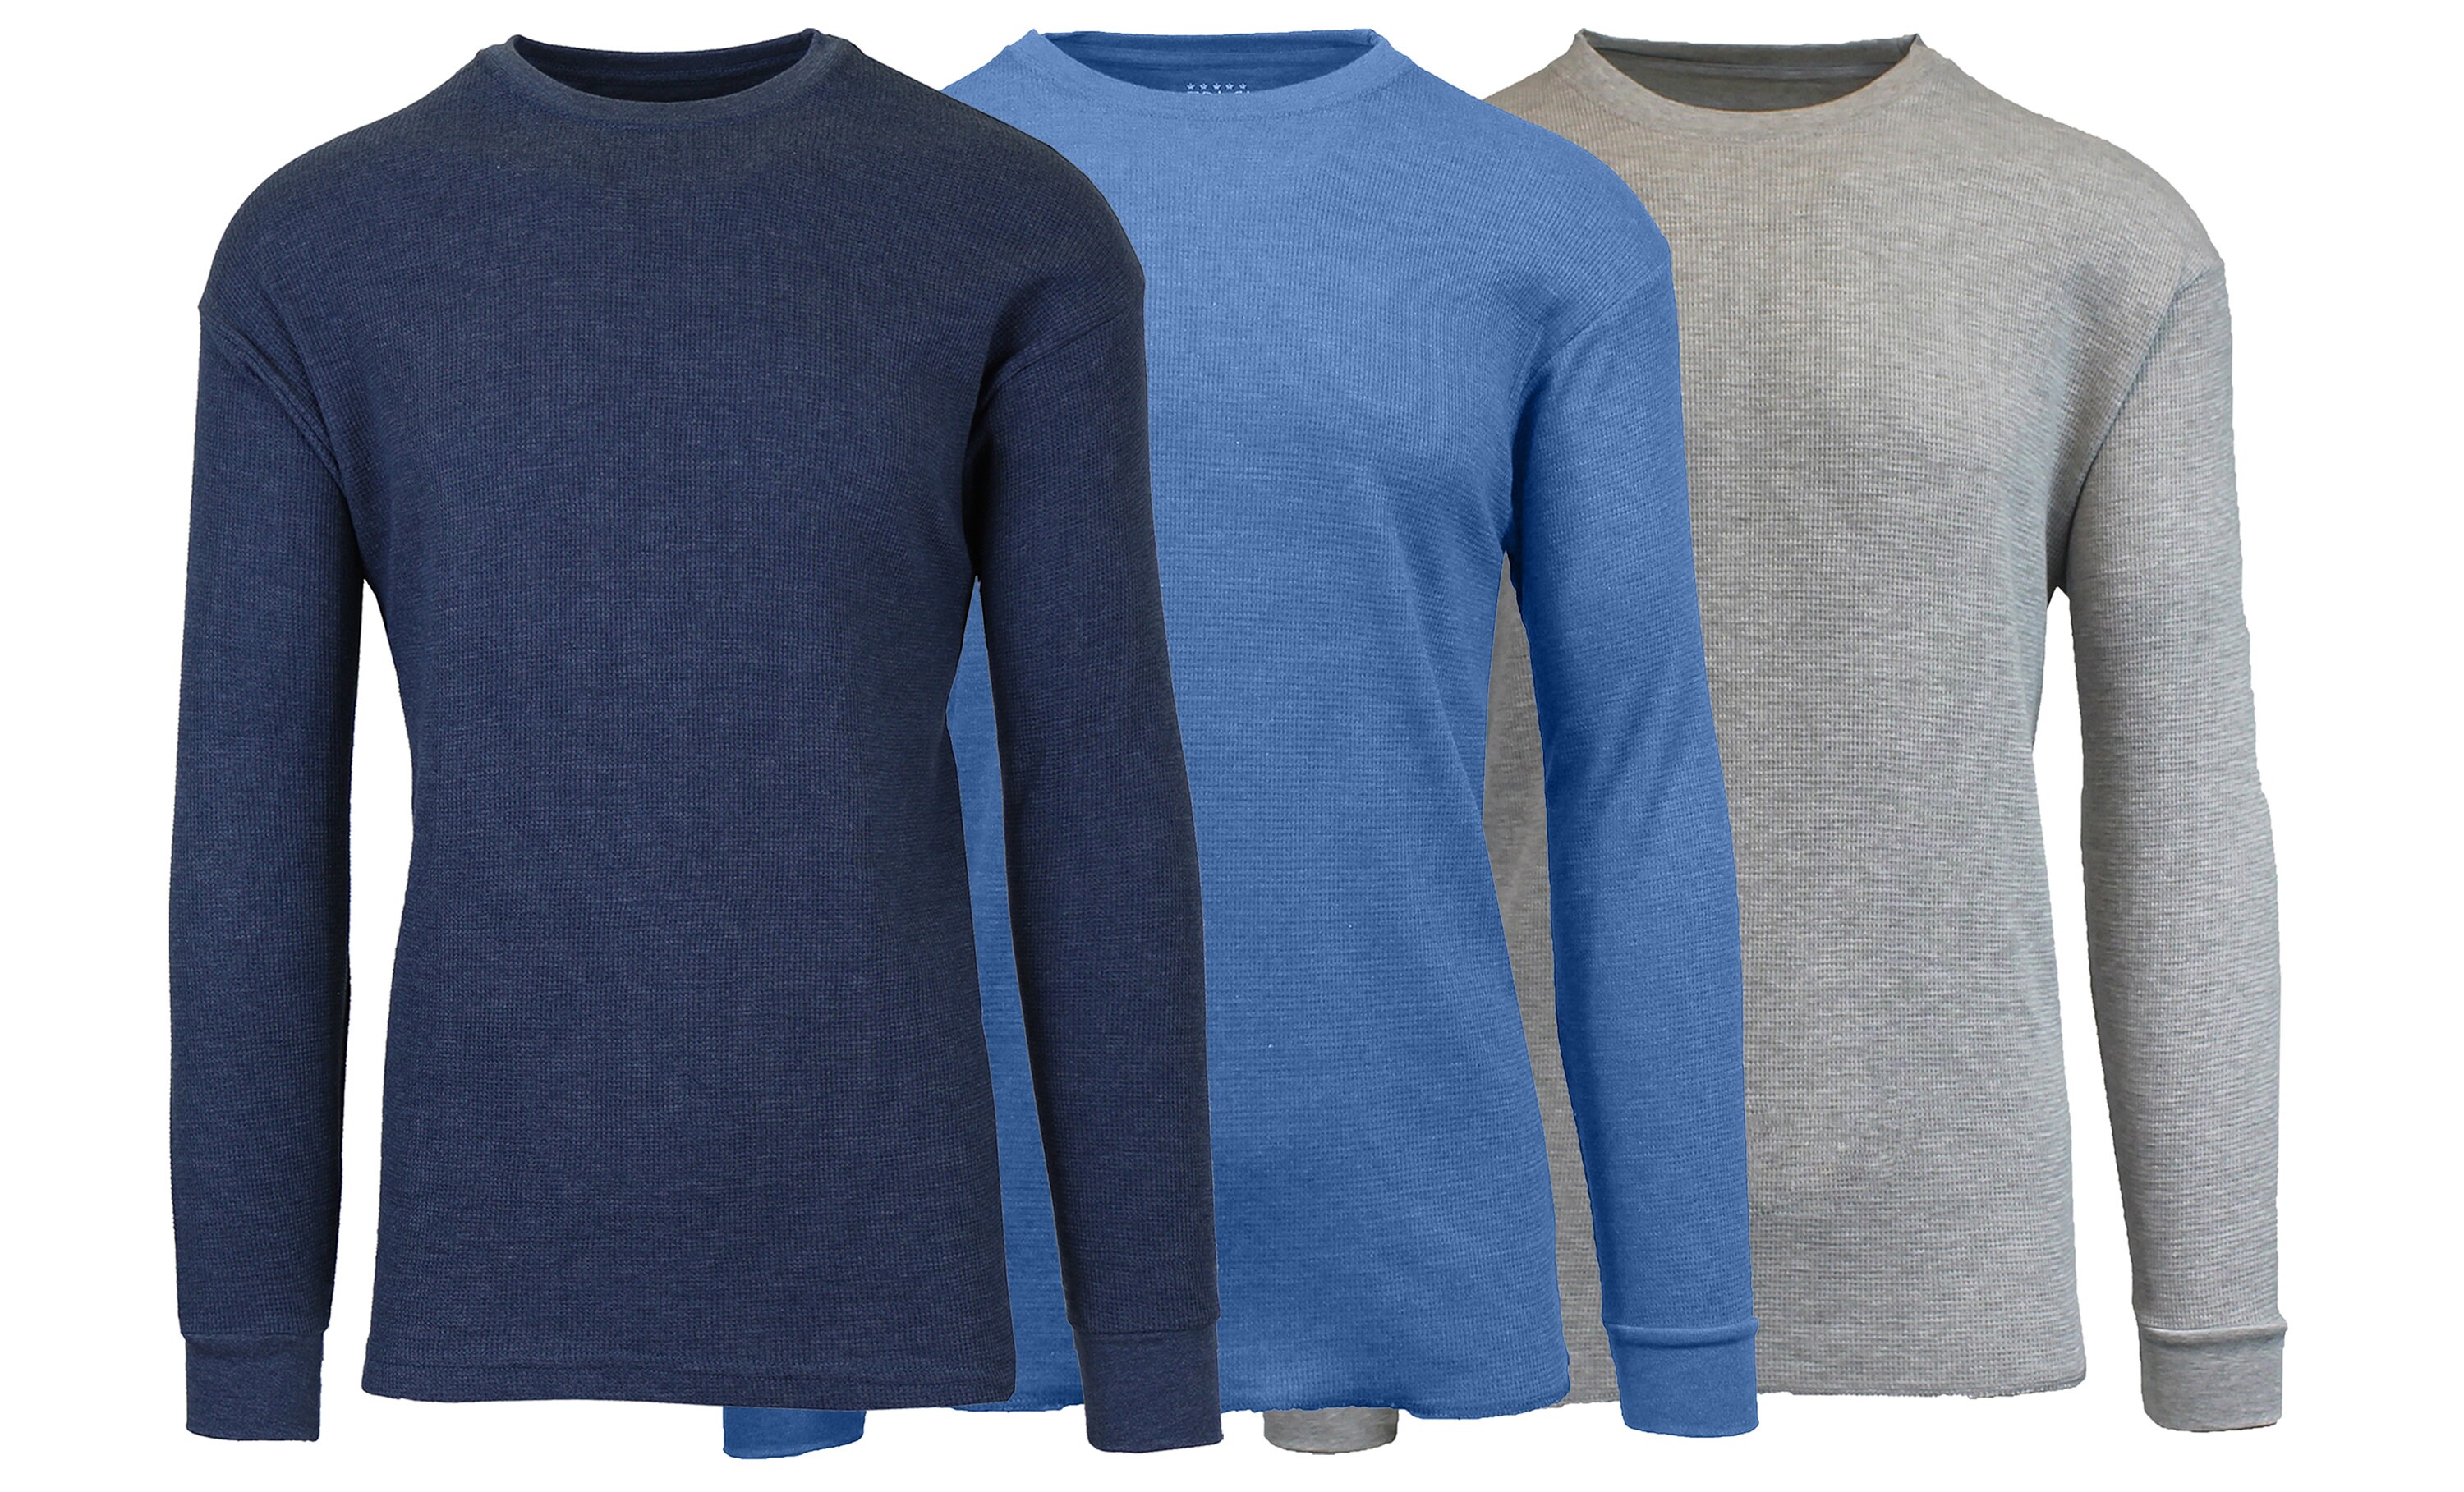 Men's 3-pack Long Sleeve Thermal Shirts - Etsy